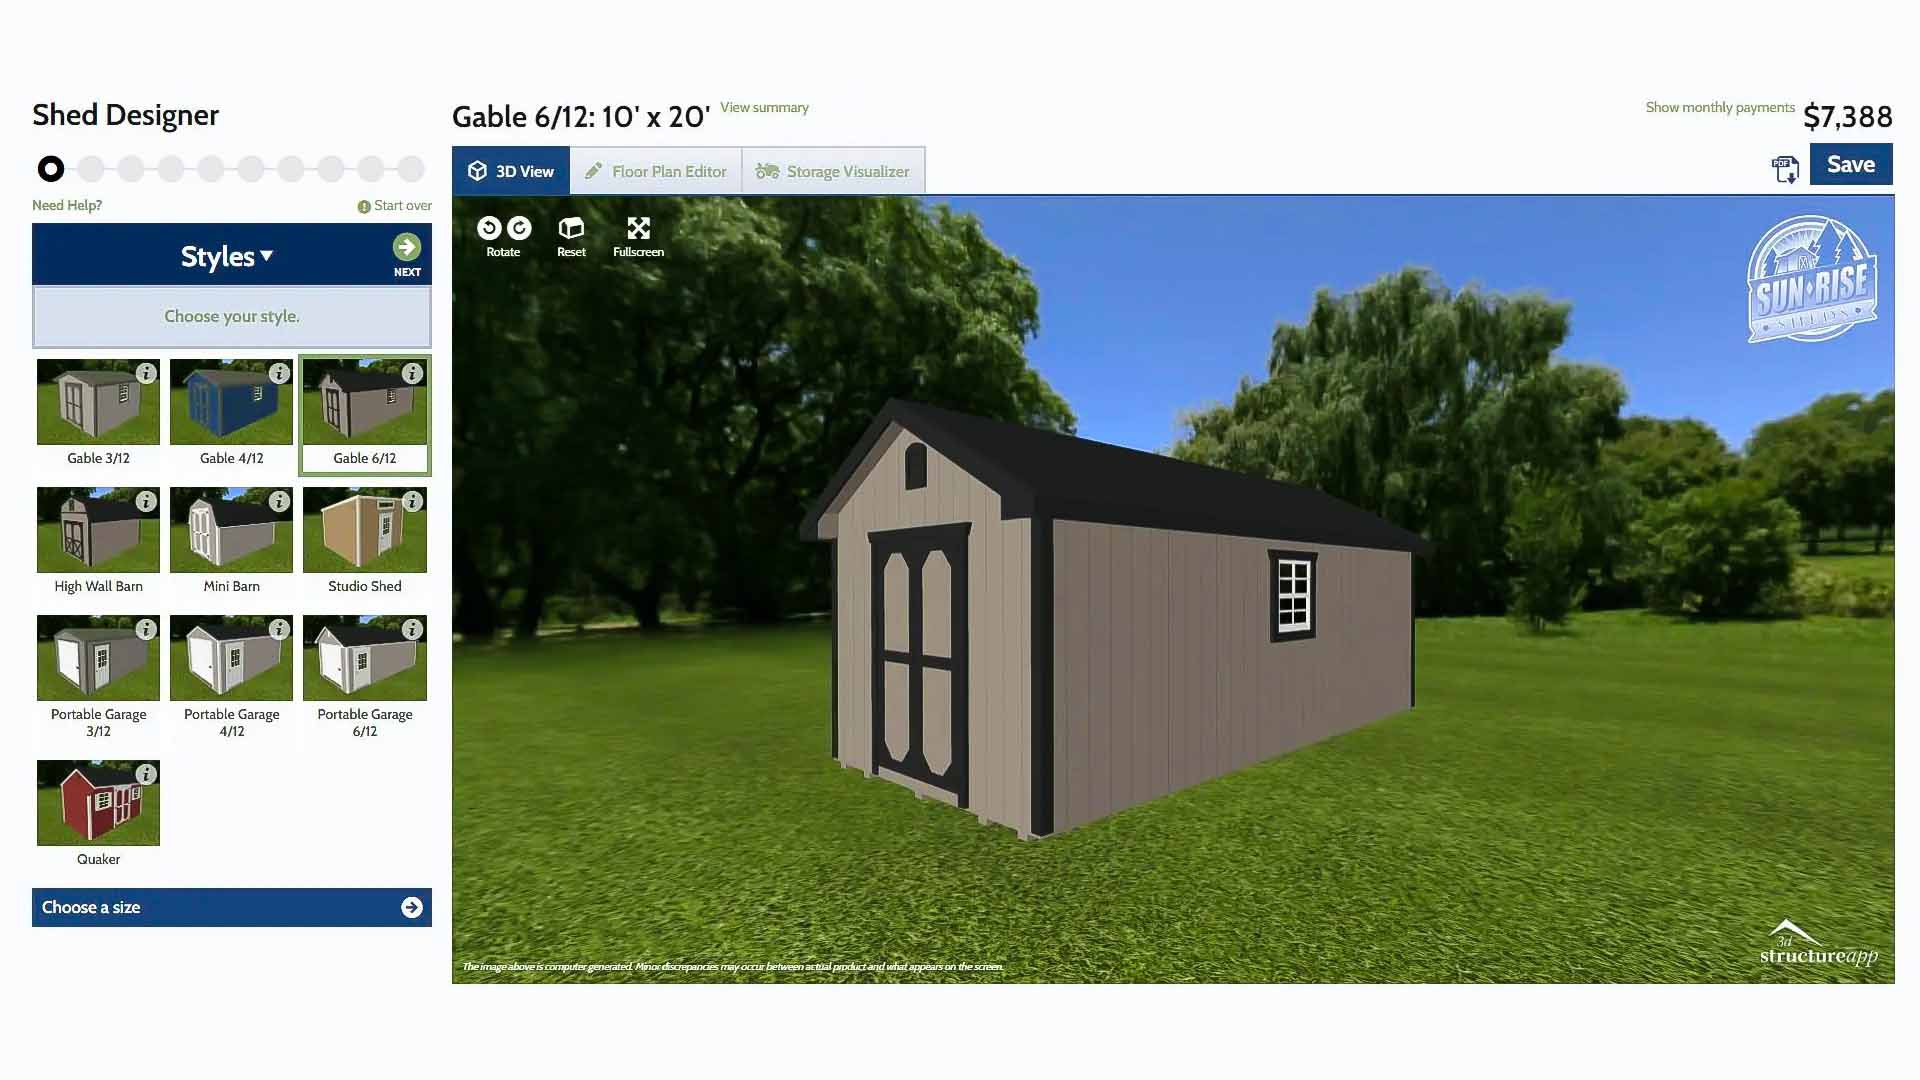 Sun Rise Sheds | How Can An Online Shed Builder Help Me Design My Dream Structure?